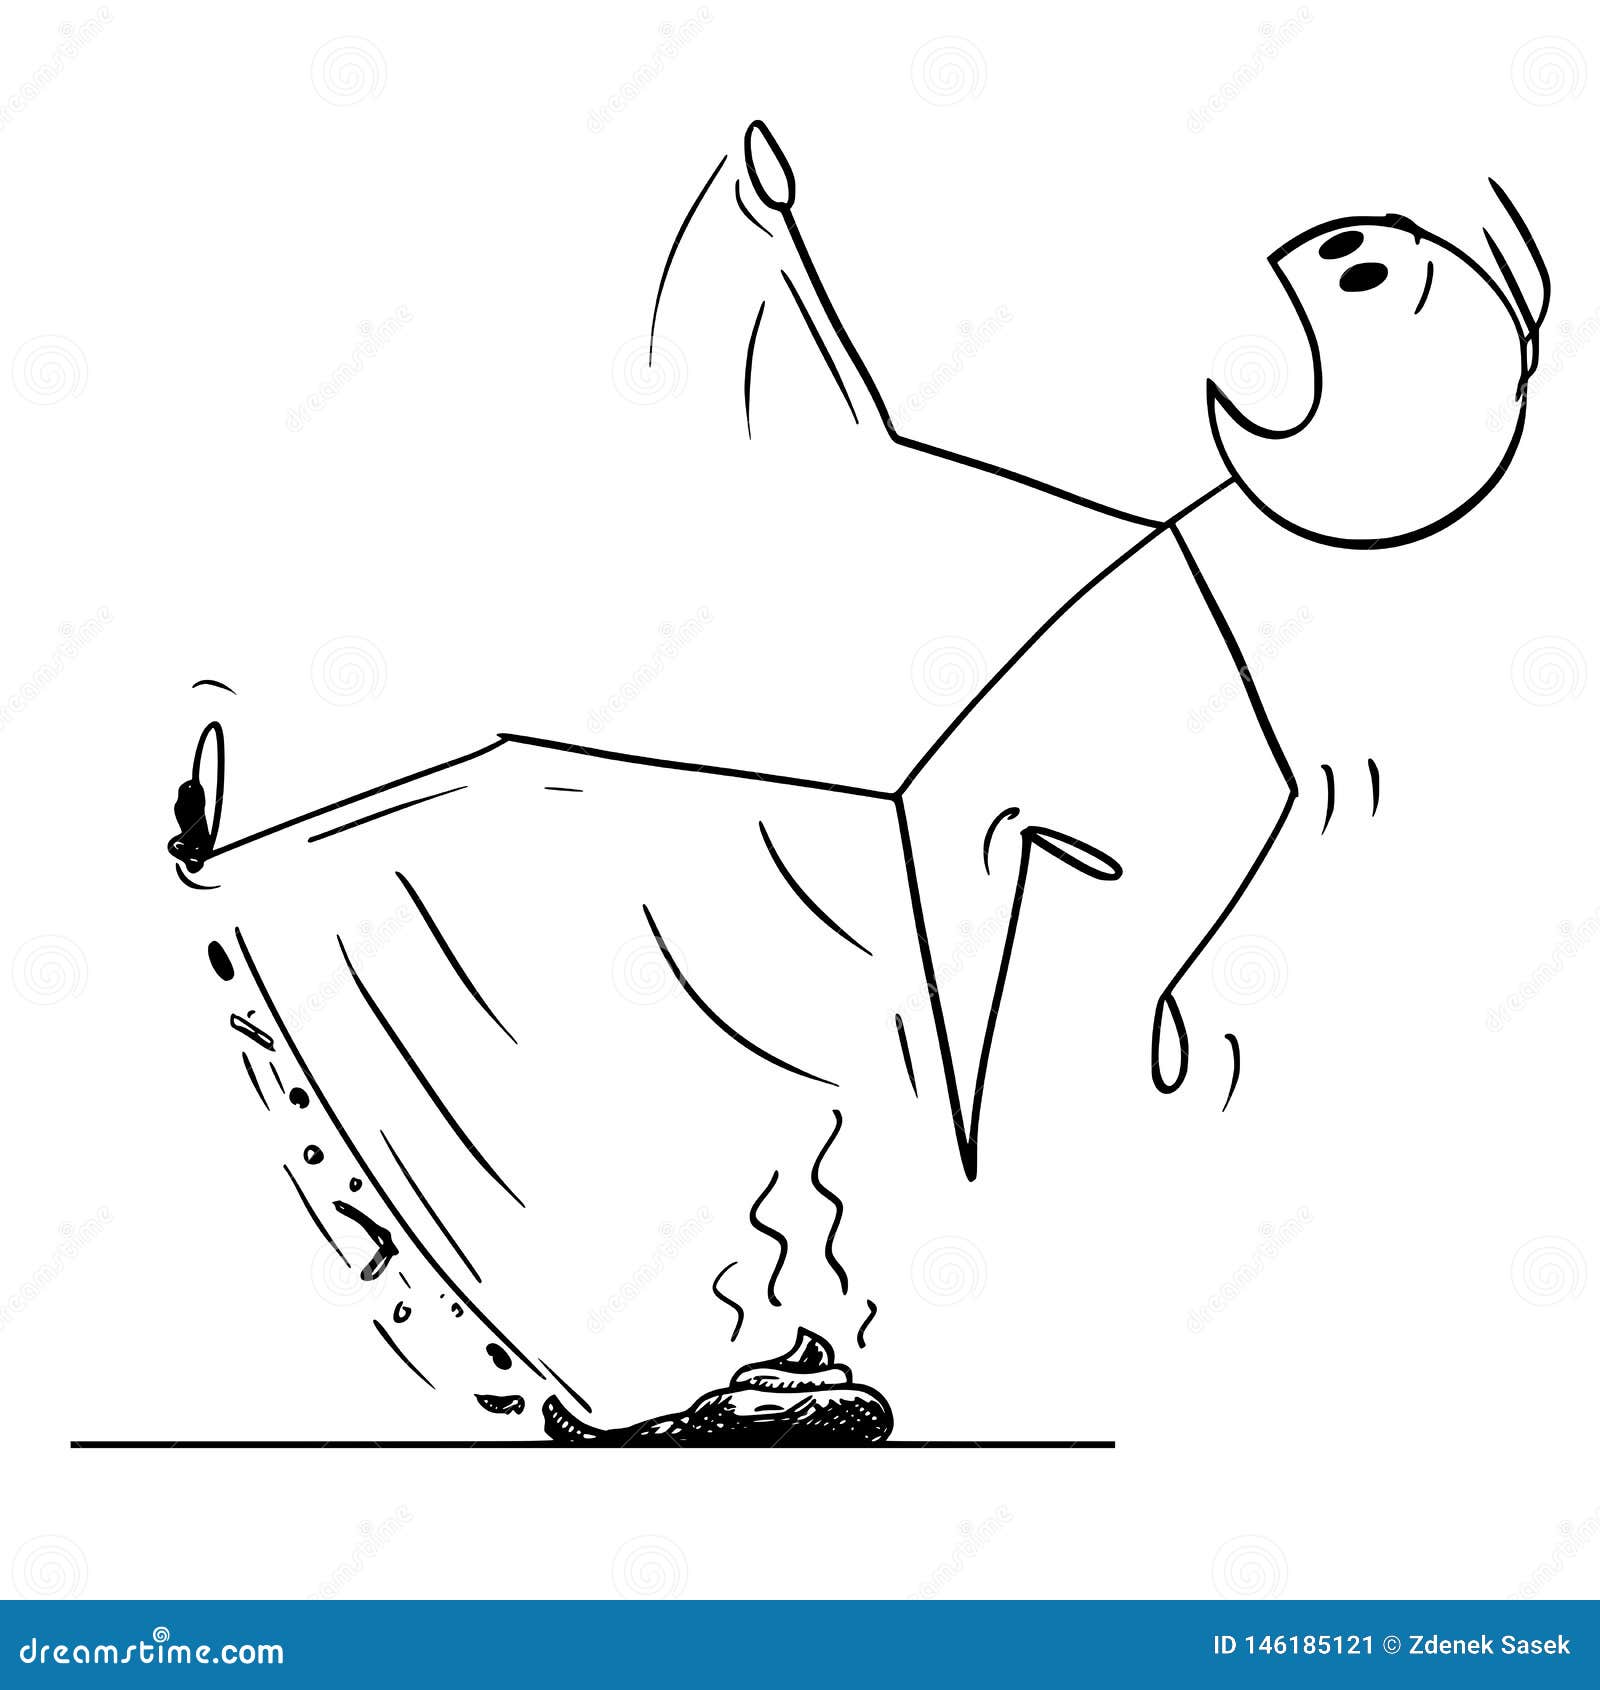 cartoon of man walking and slipping on the dog excrement or poop or shit or stool